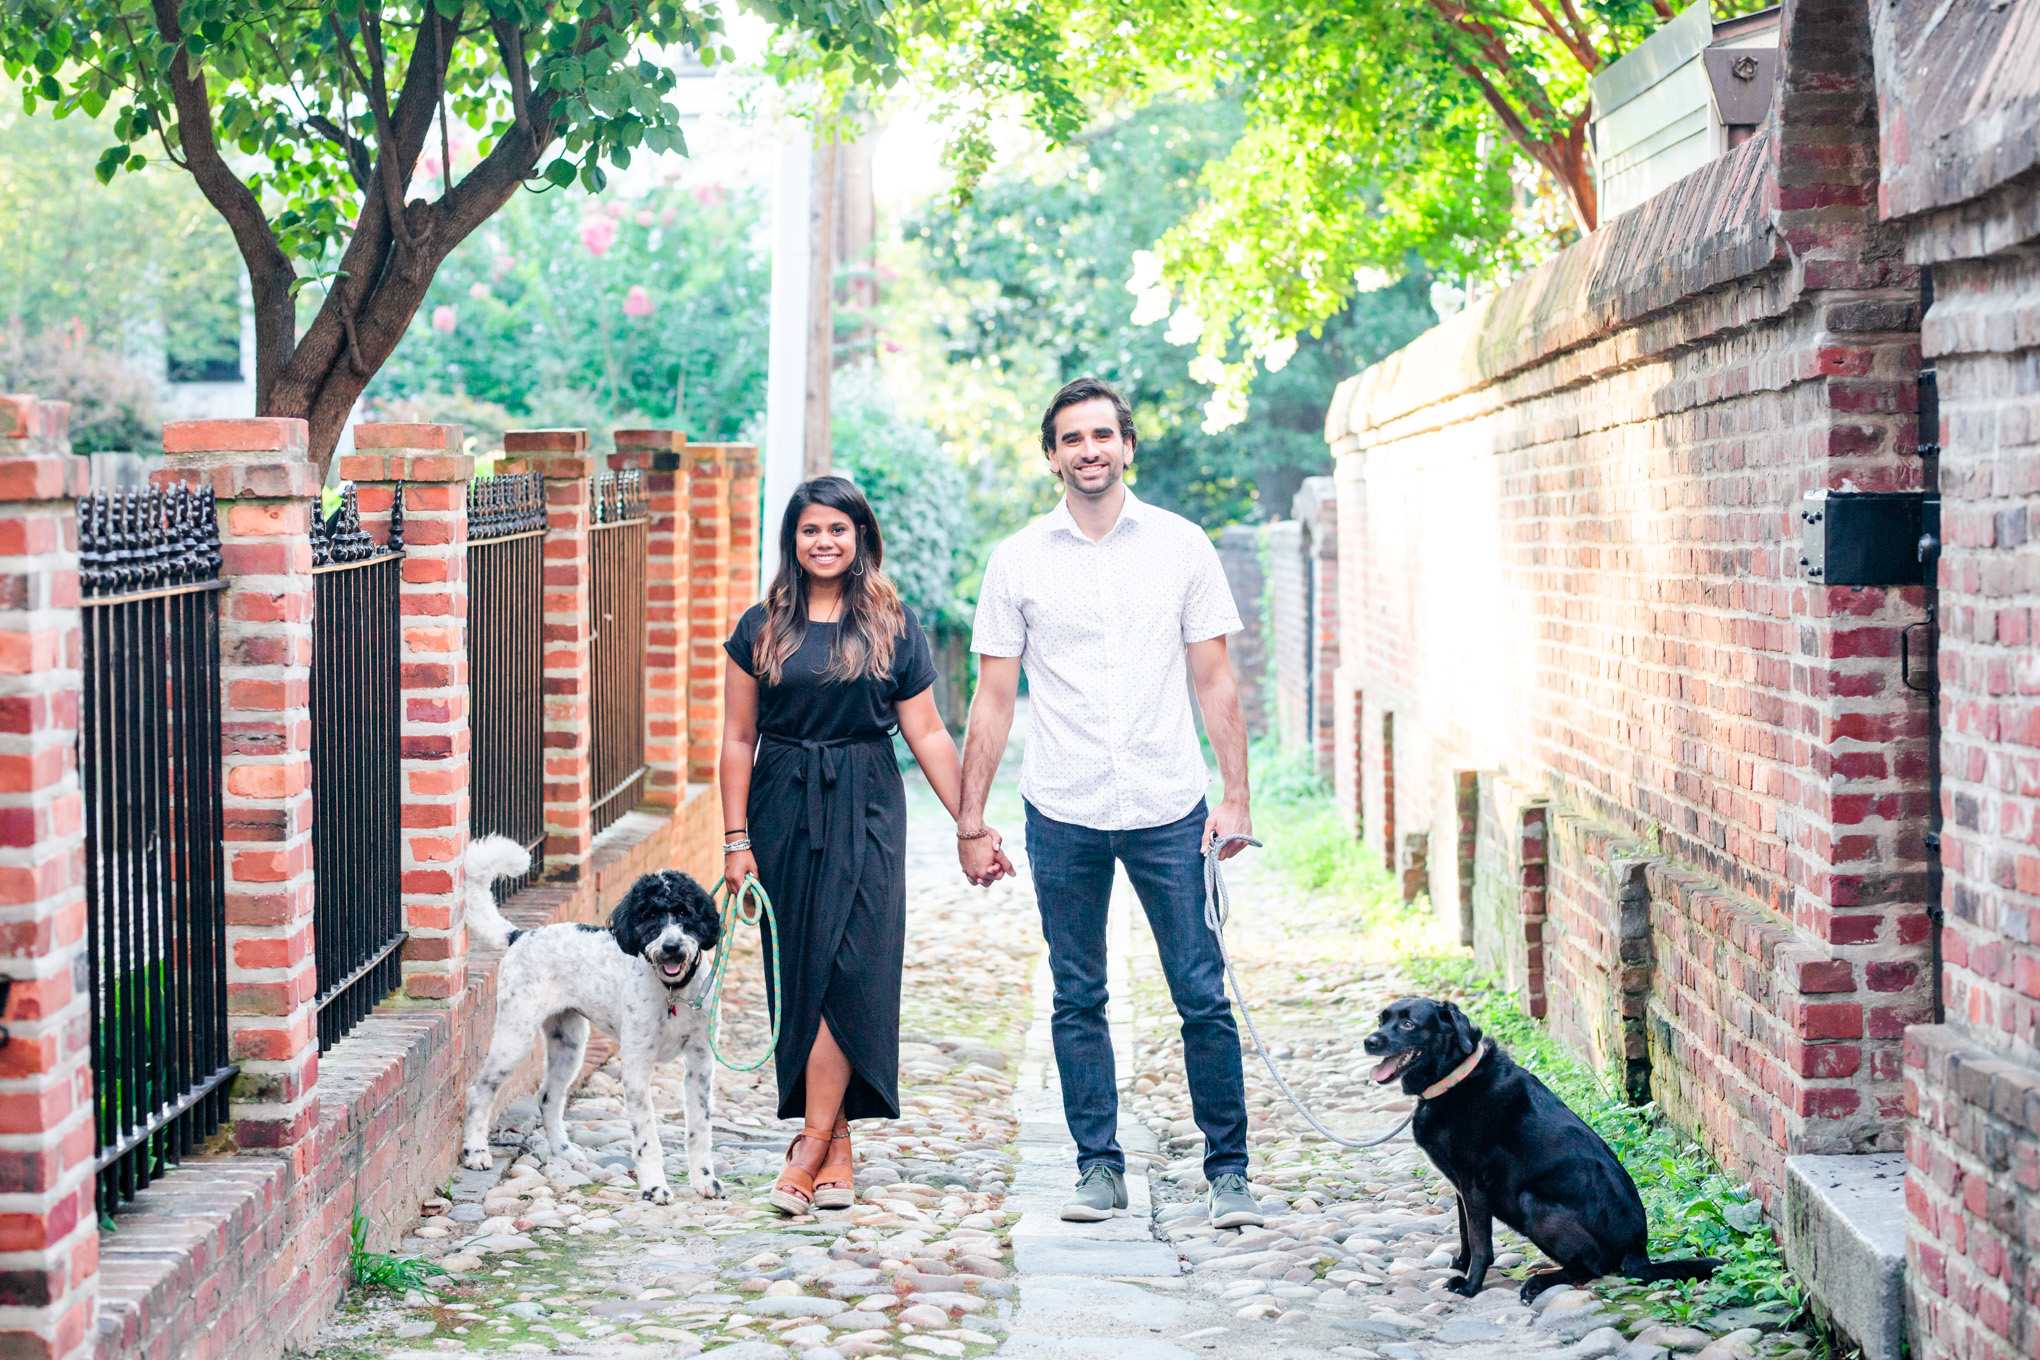 Old Town Alexandria engagement photos, Alexandria engagement photos, Old Town Alexandria photos, Old Town Alexandria, Alexandria engagement photos, Alexandria Virginia, classic engagement photos, historic town engagement photos, engagement photos, Rachel E.H. Photography, couple with dogs